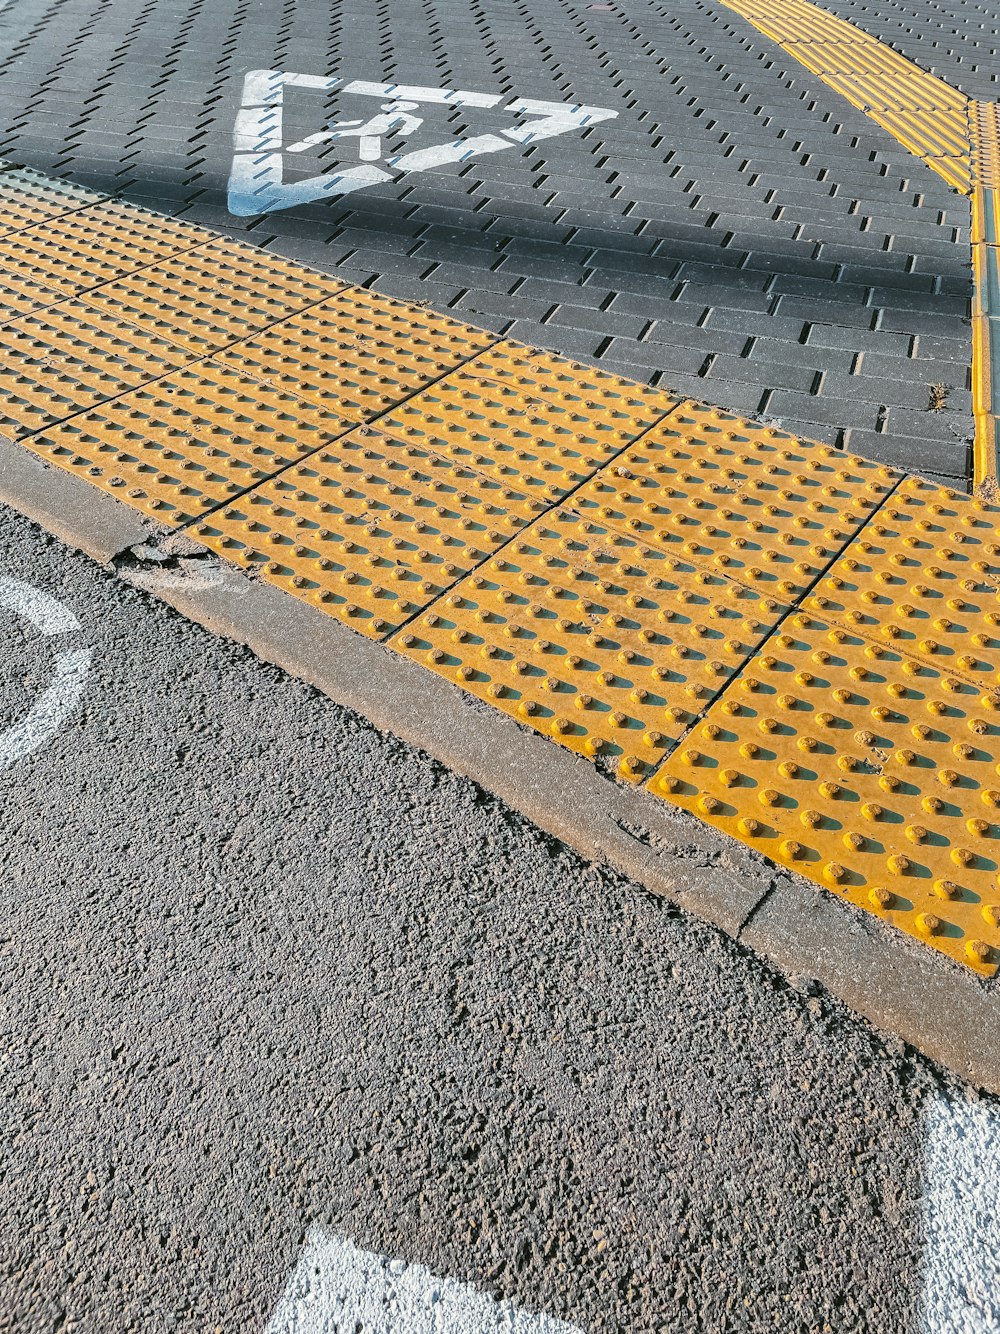 a yellow stop sign sitting on the side of a road